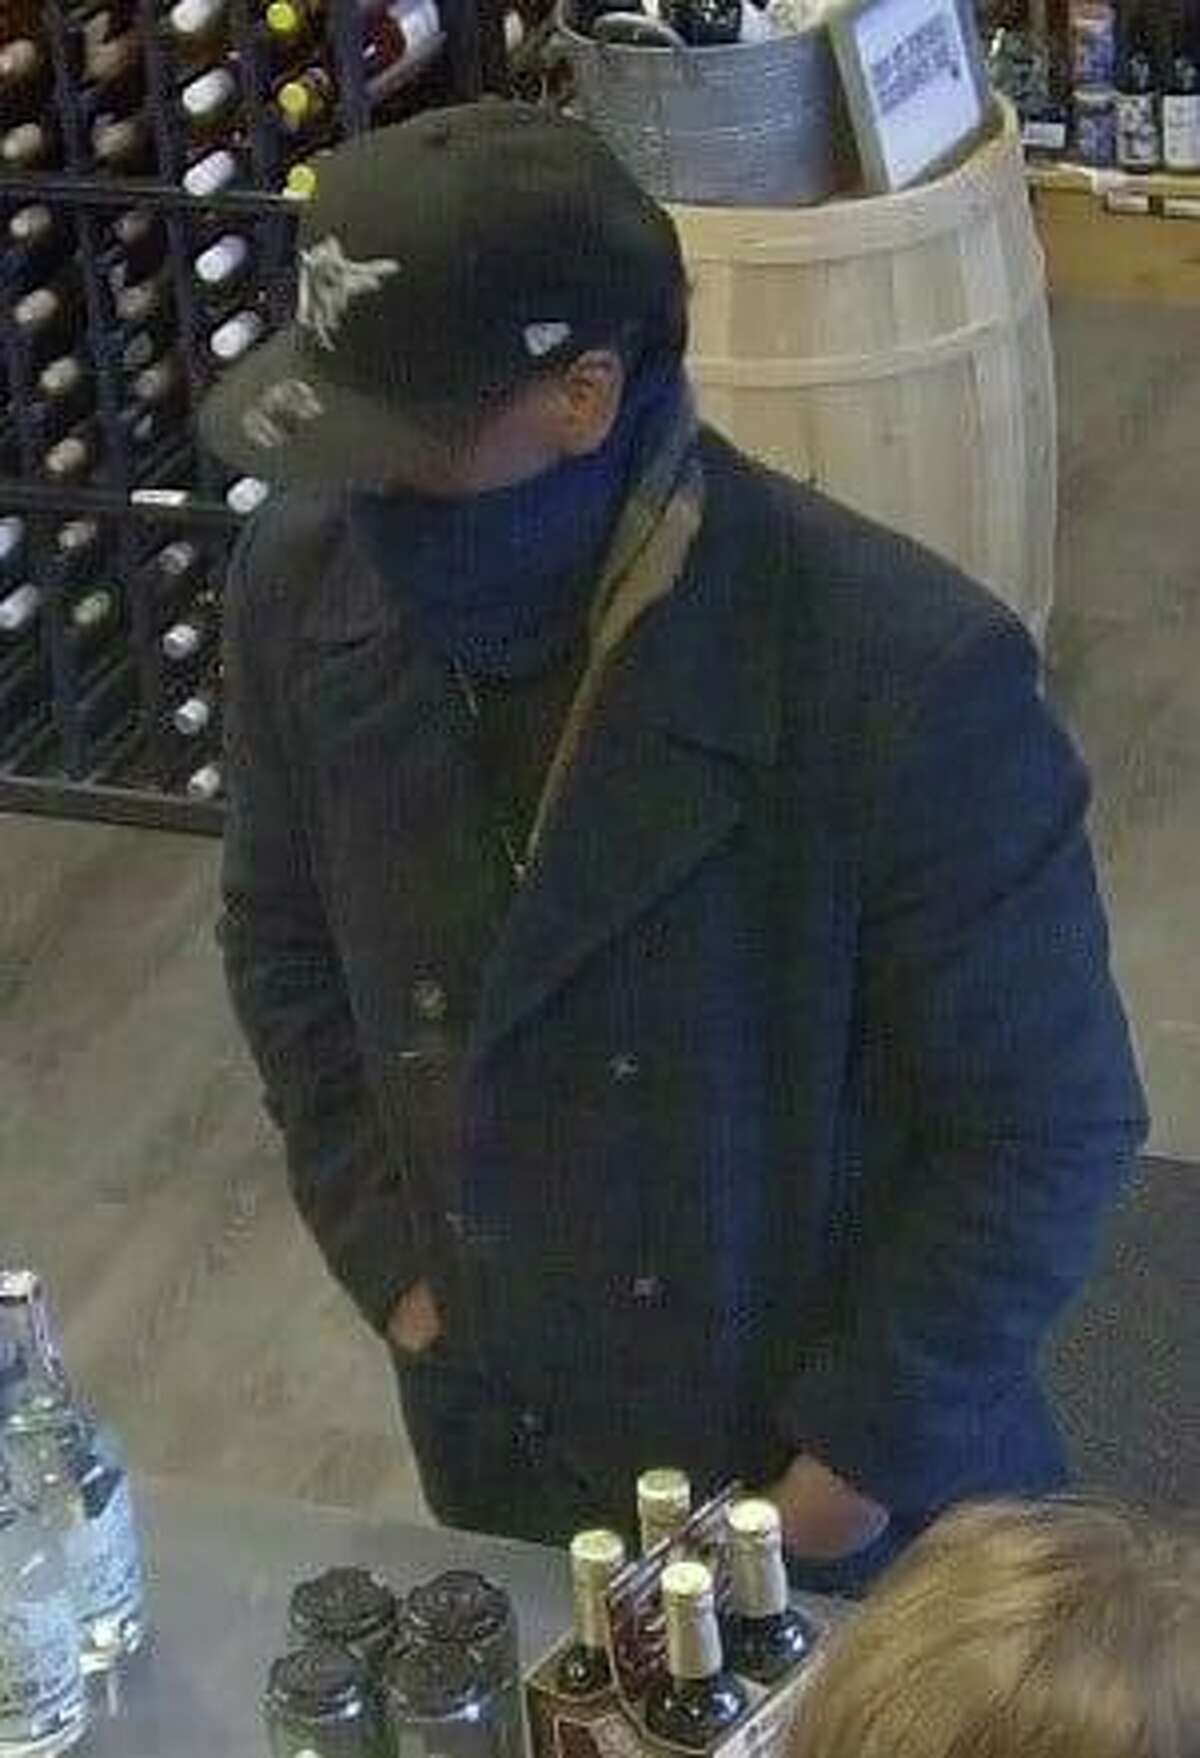 Police are seeking the public’s help in identifying this man, who is wanted in connection with a recent liquor store larceny in Roxbury, Conn.